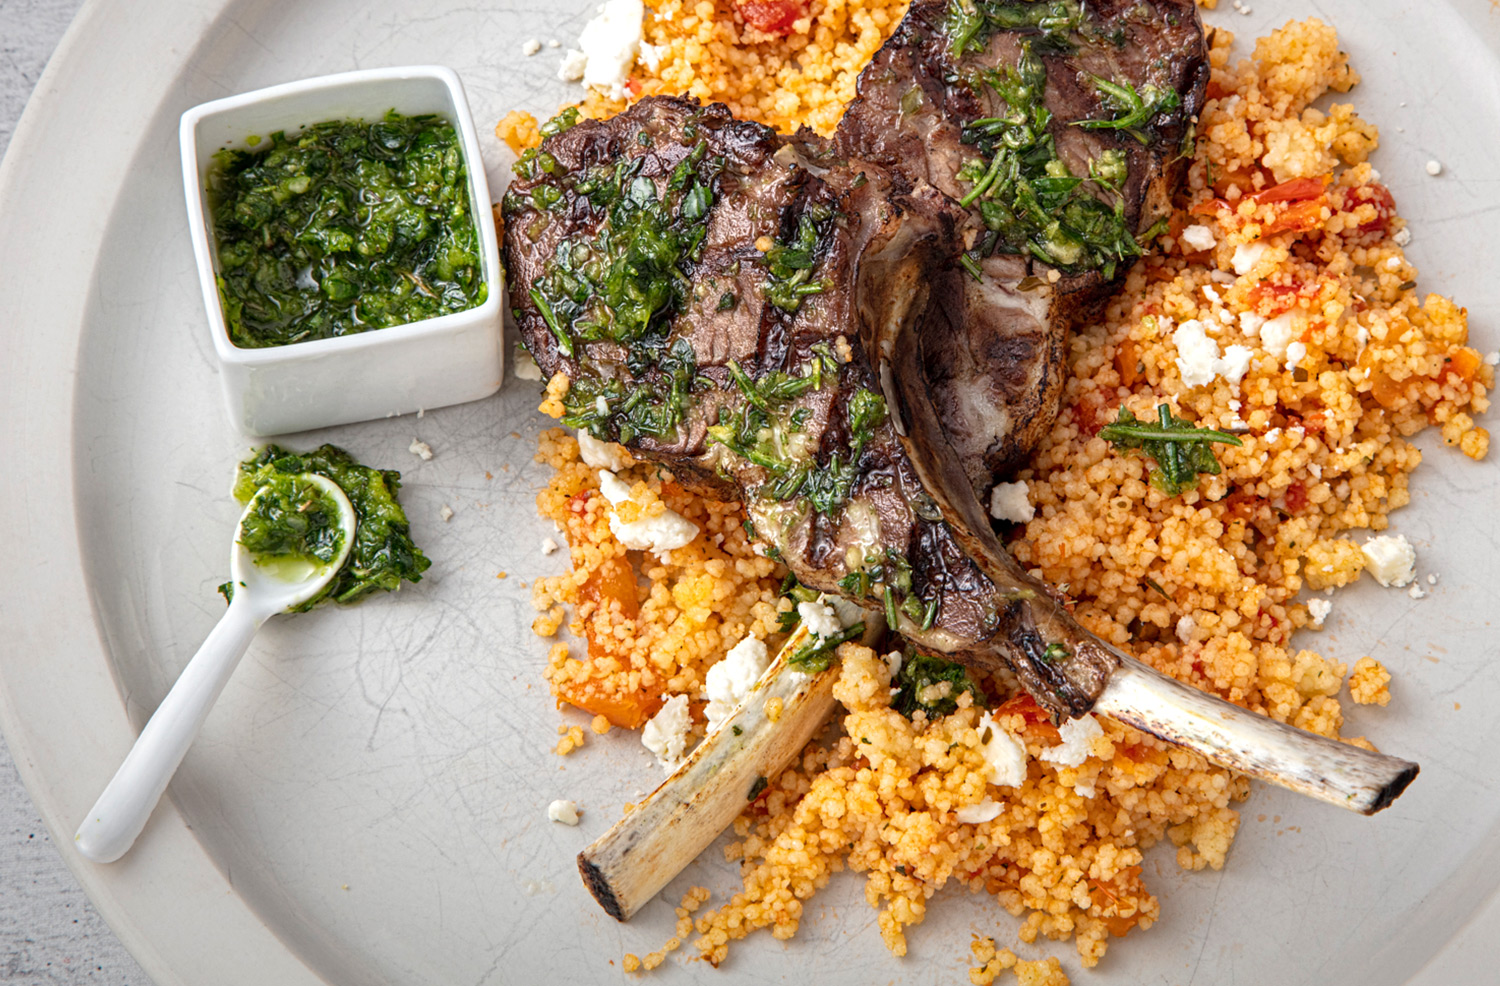 Grilled Herb Crusted Lam Chops with Couscous and Feta Cheese